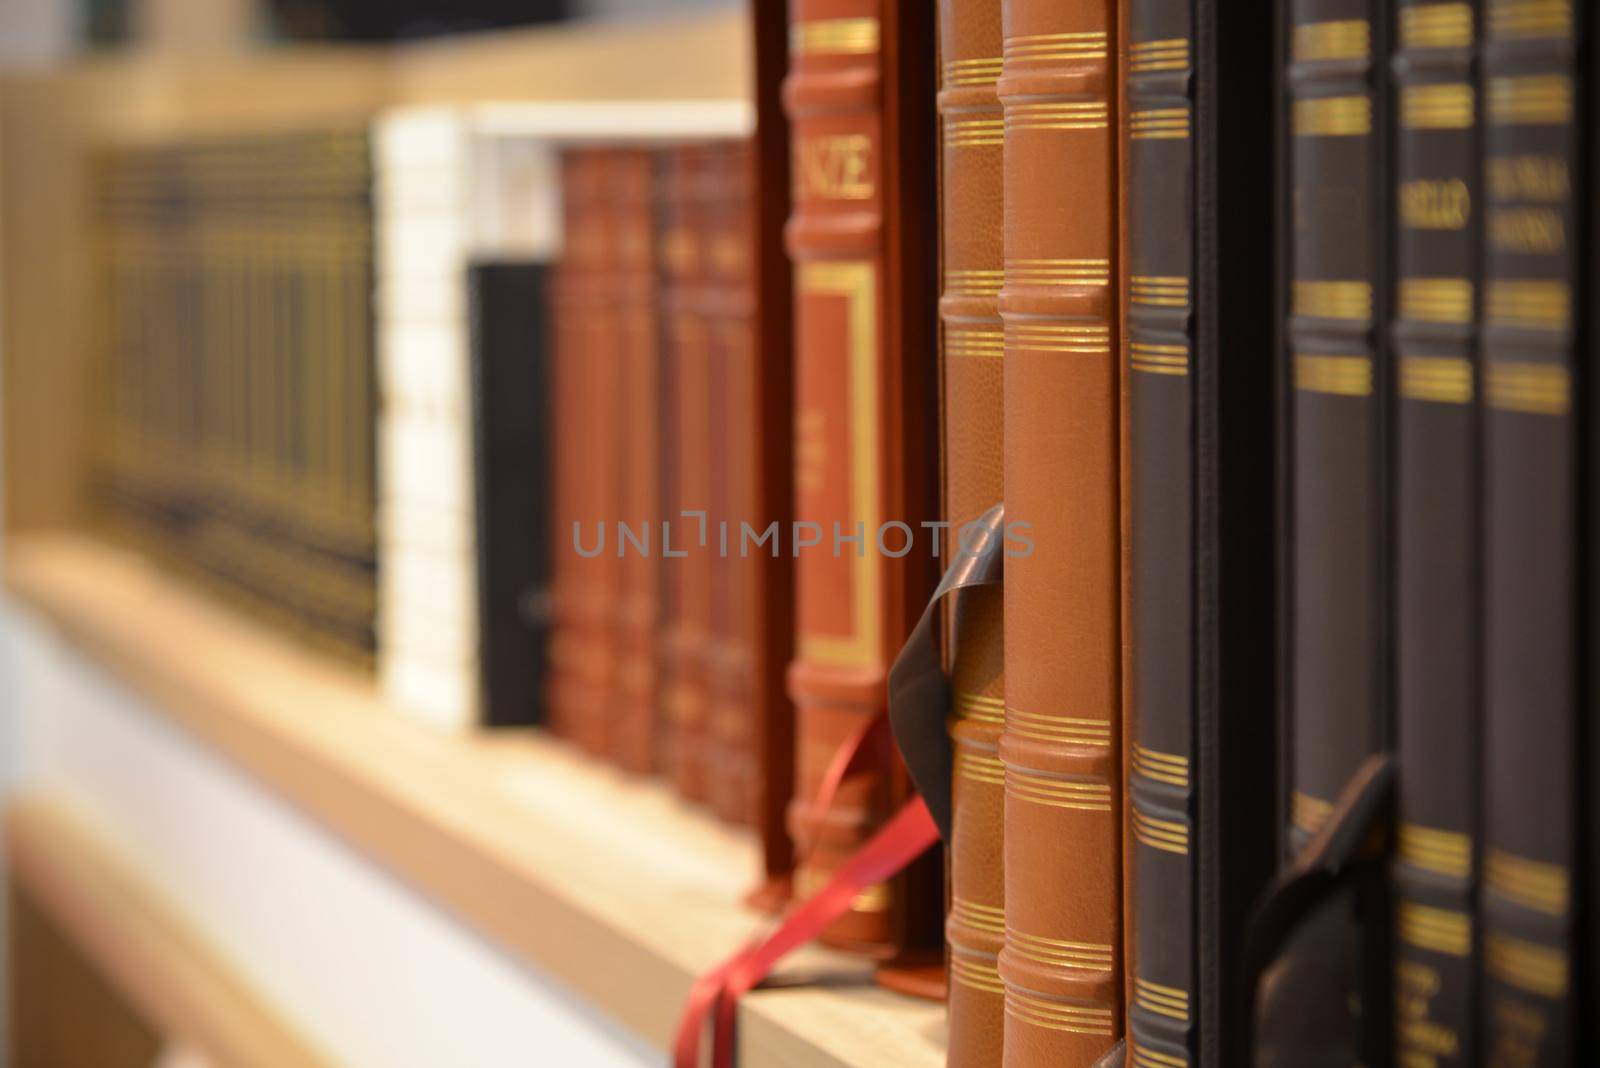 Bookshelf in perspective view with row of classical leather hardcover books